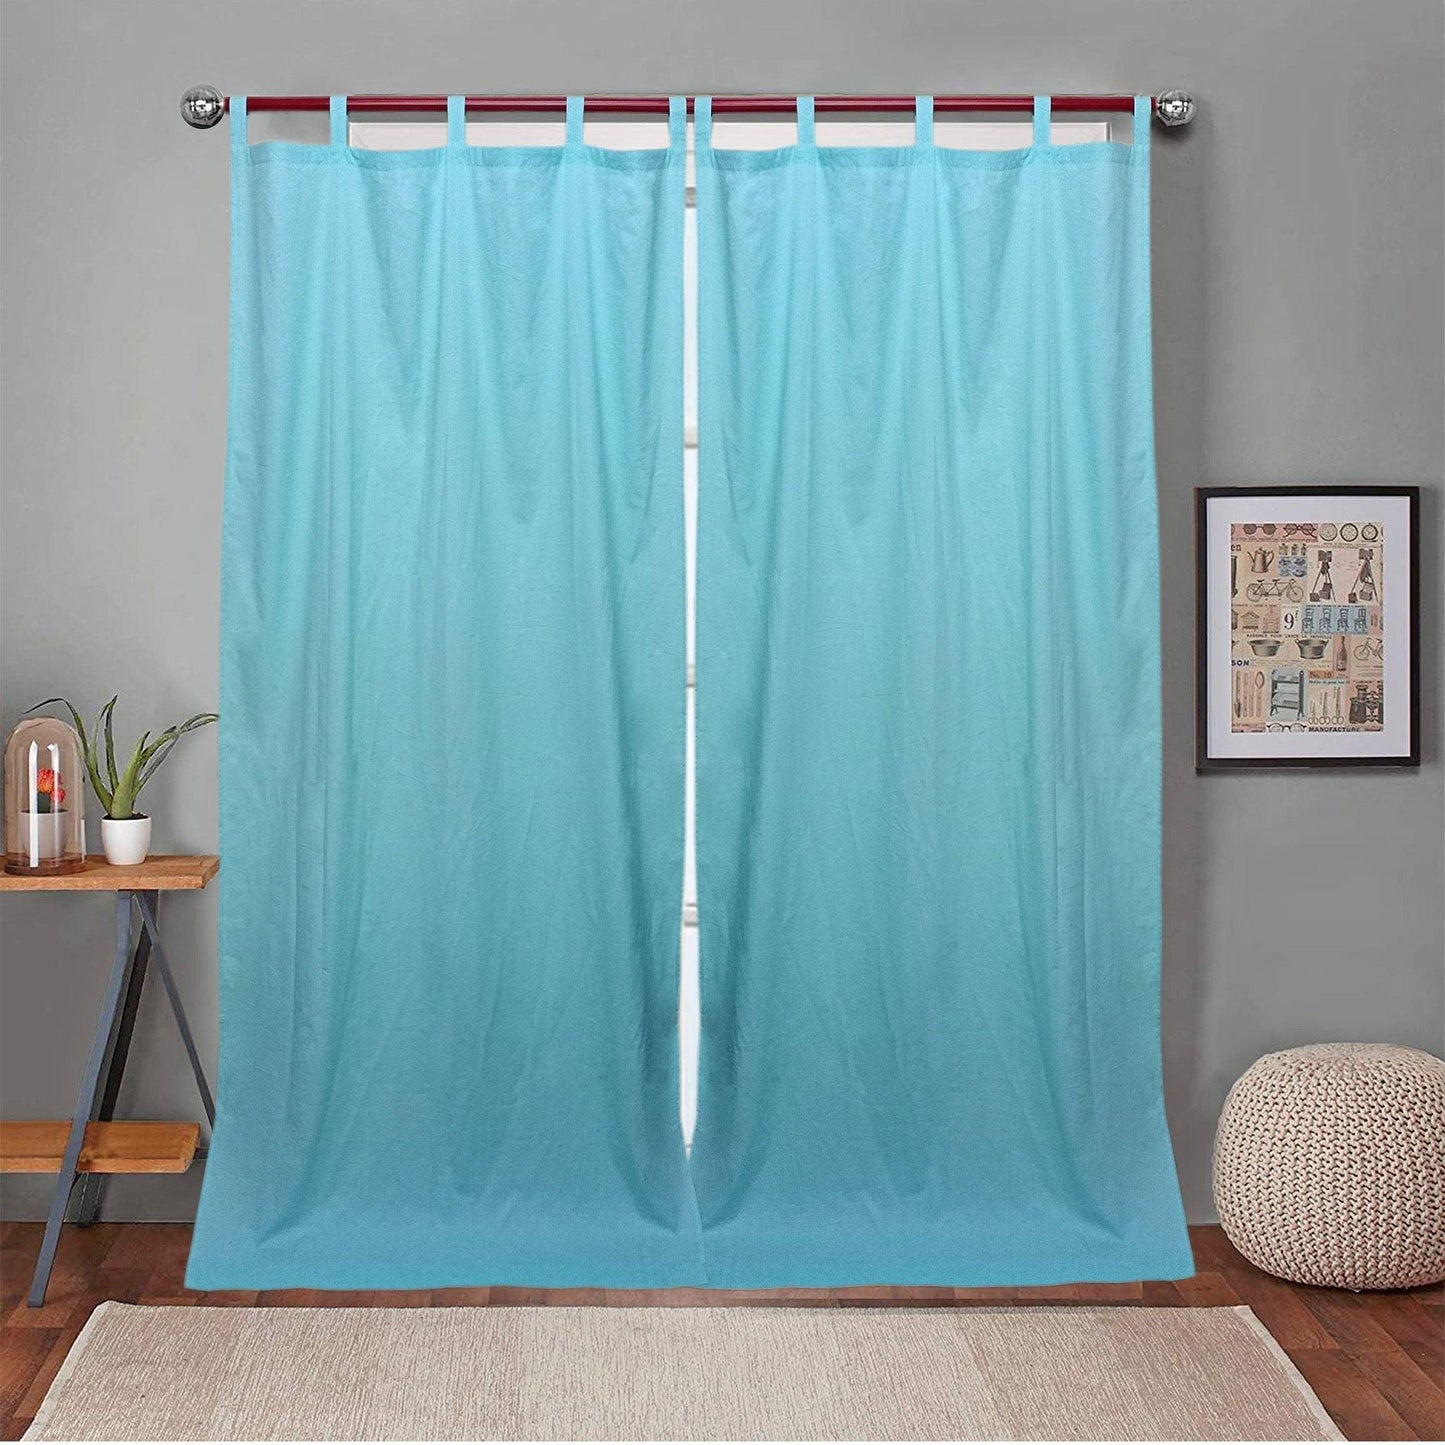 Solid Sky blue Voile Curtain Pair - The Teal Thread